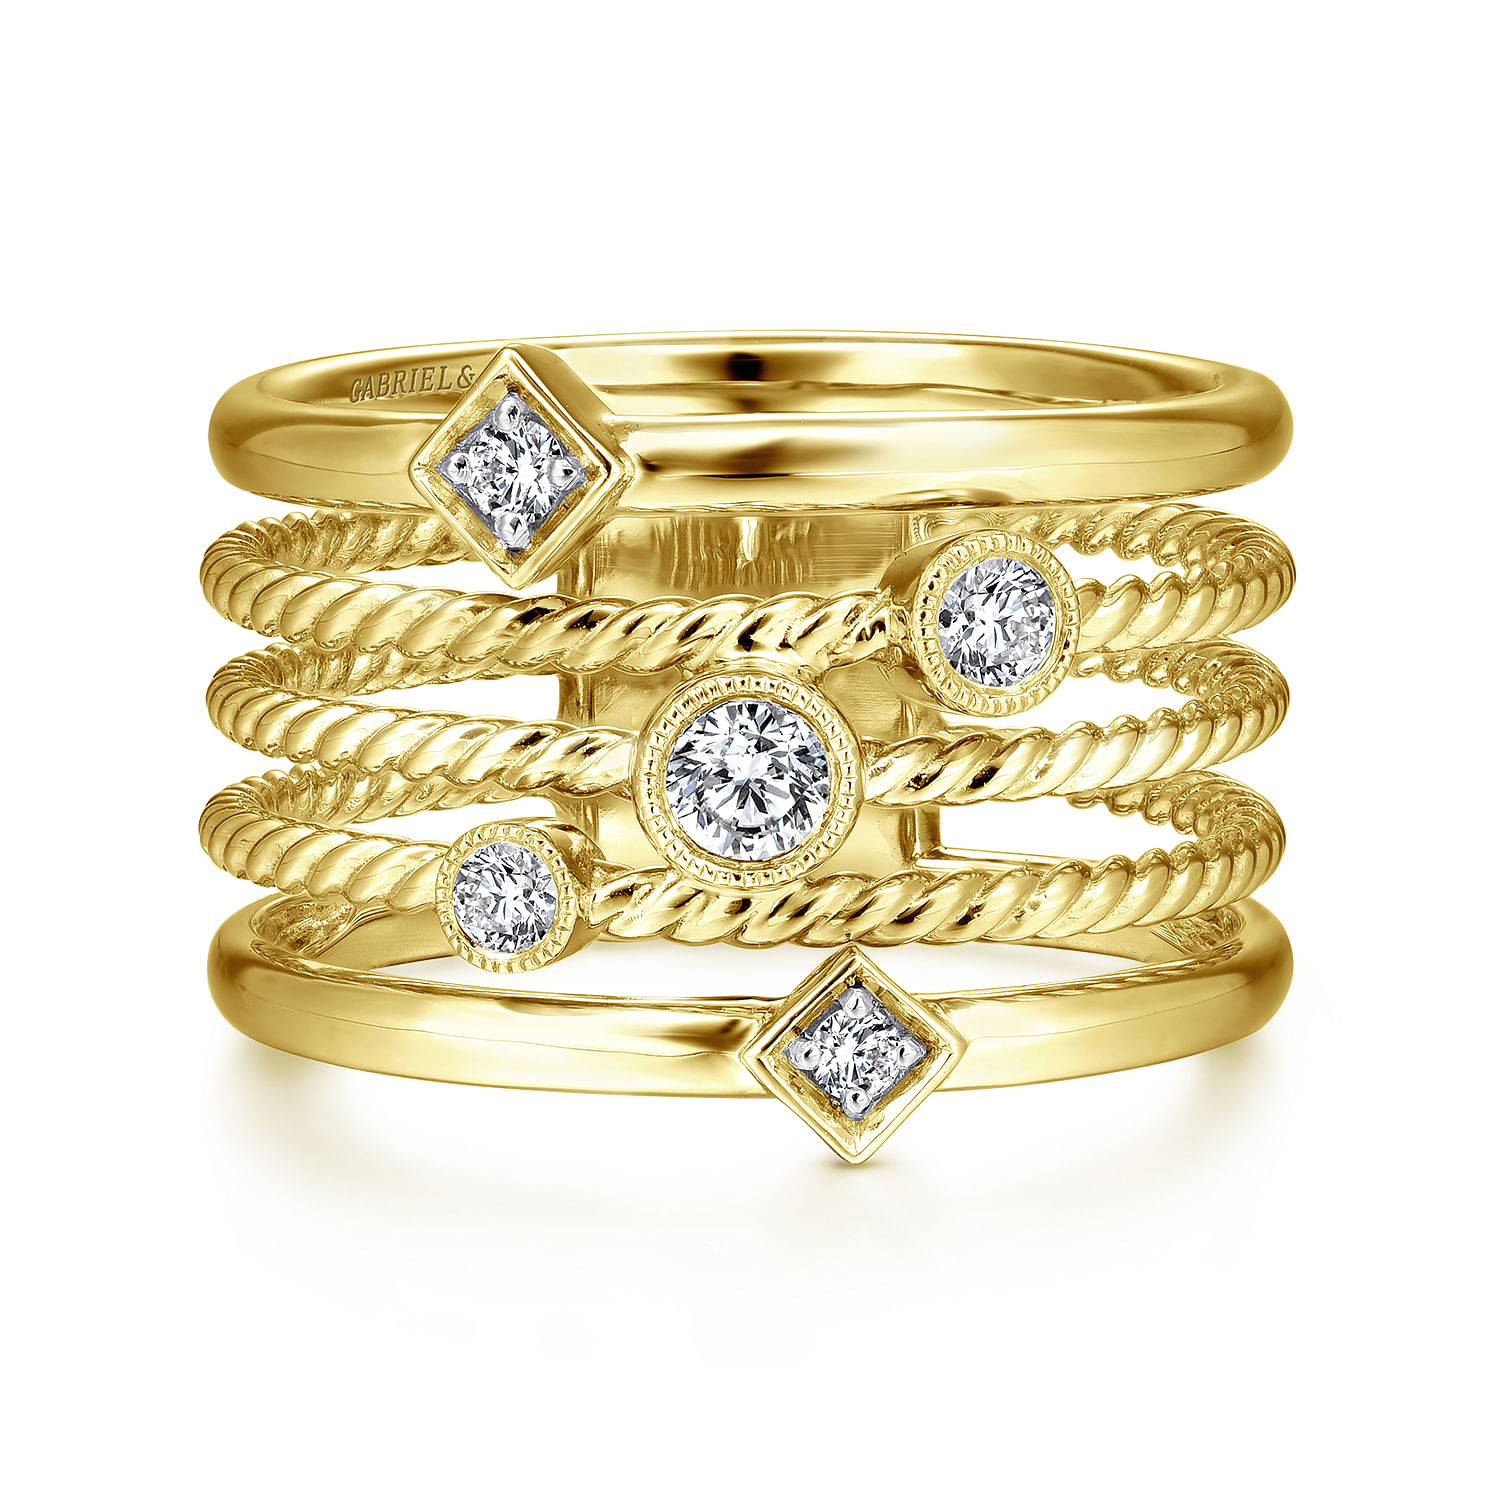 Signature Collection 14k Yellow Gold Twisted Braided Diamond Wide Band Ring  by Gabriel NY LR51558Y - Emerald Lady Jewelry